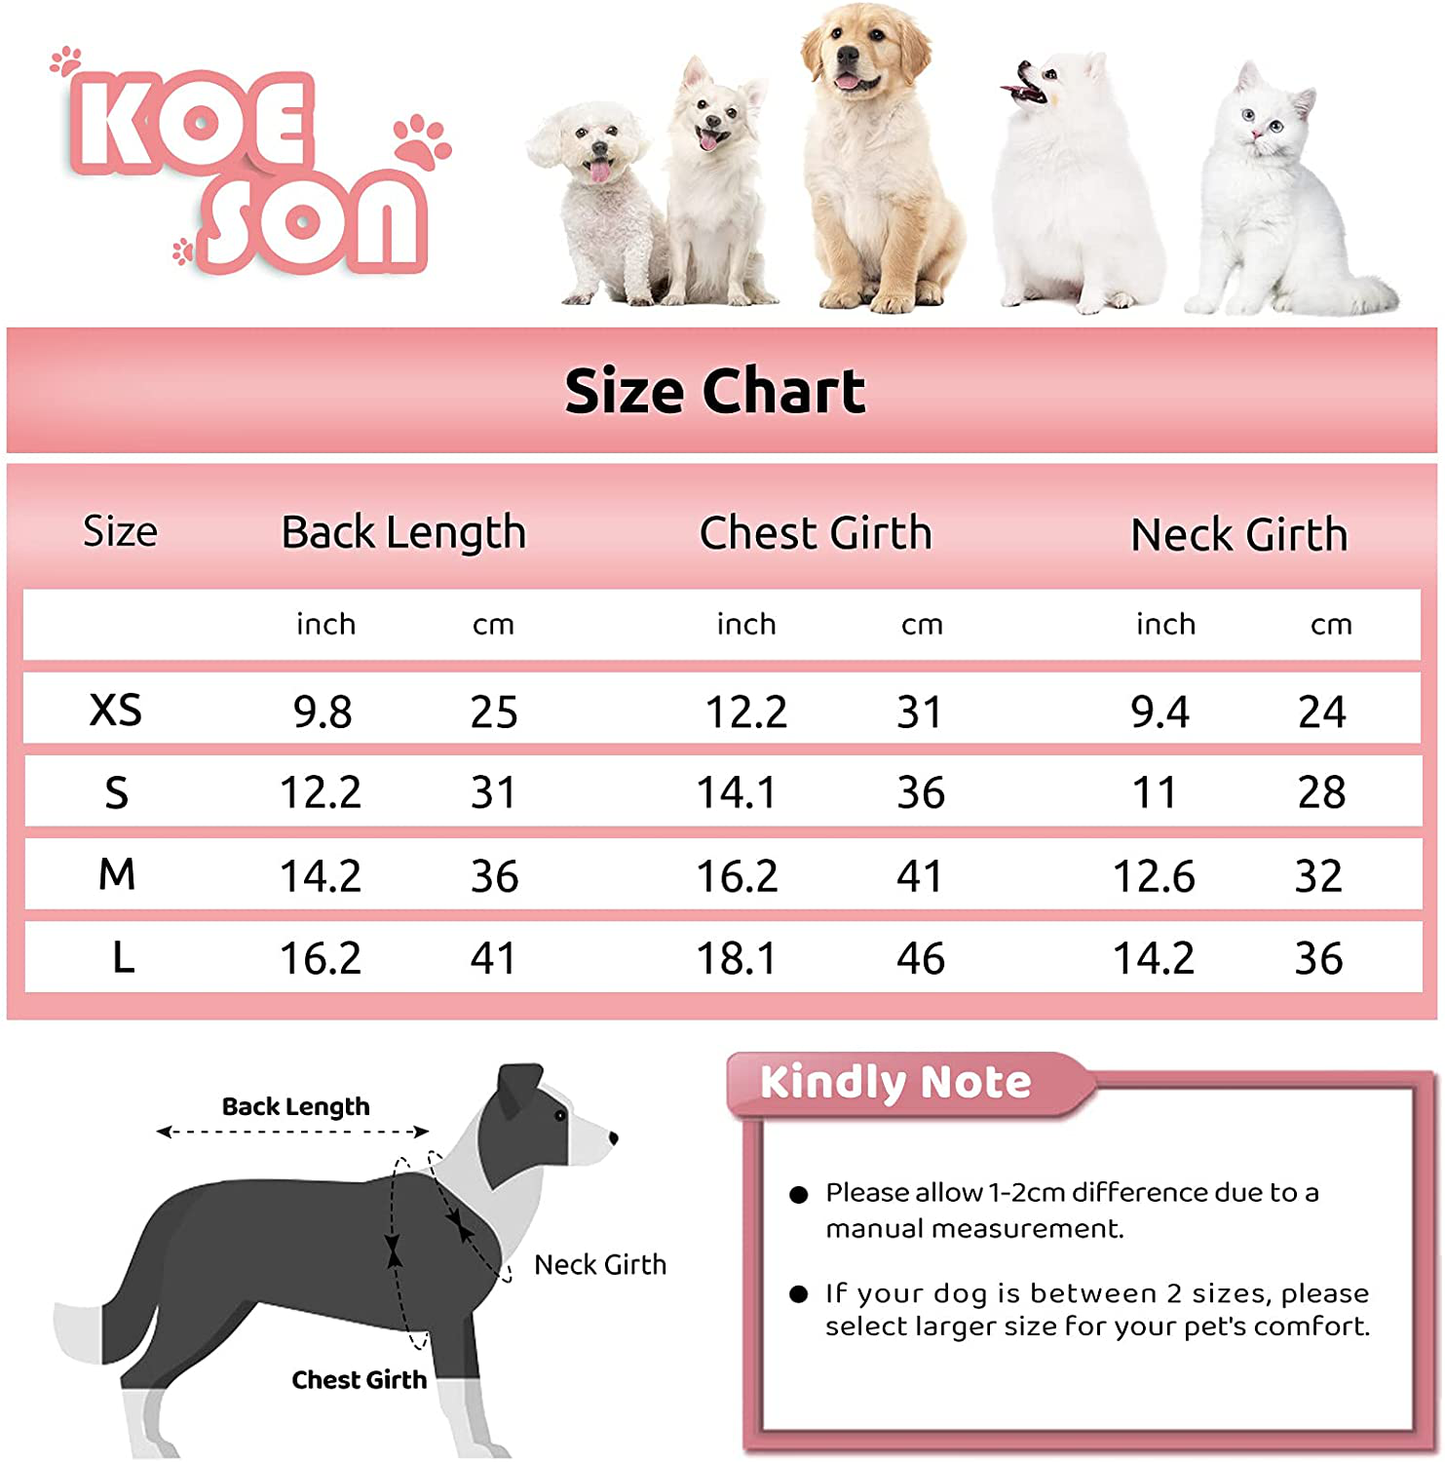 KOESON 2 Pack Dog Dresses Pet Princess Skirts with Ribbon Bowknot, Cute Puppy Sundress Spring Summer Shirts Vest for Small Dogs Cats, Pet Apparel Clothes Doggie Costume for Wedding Holiday Birthday